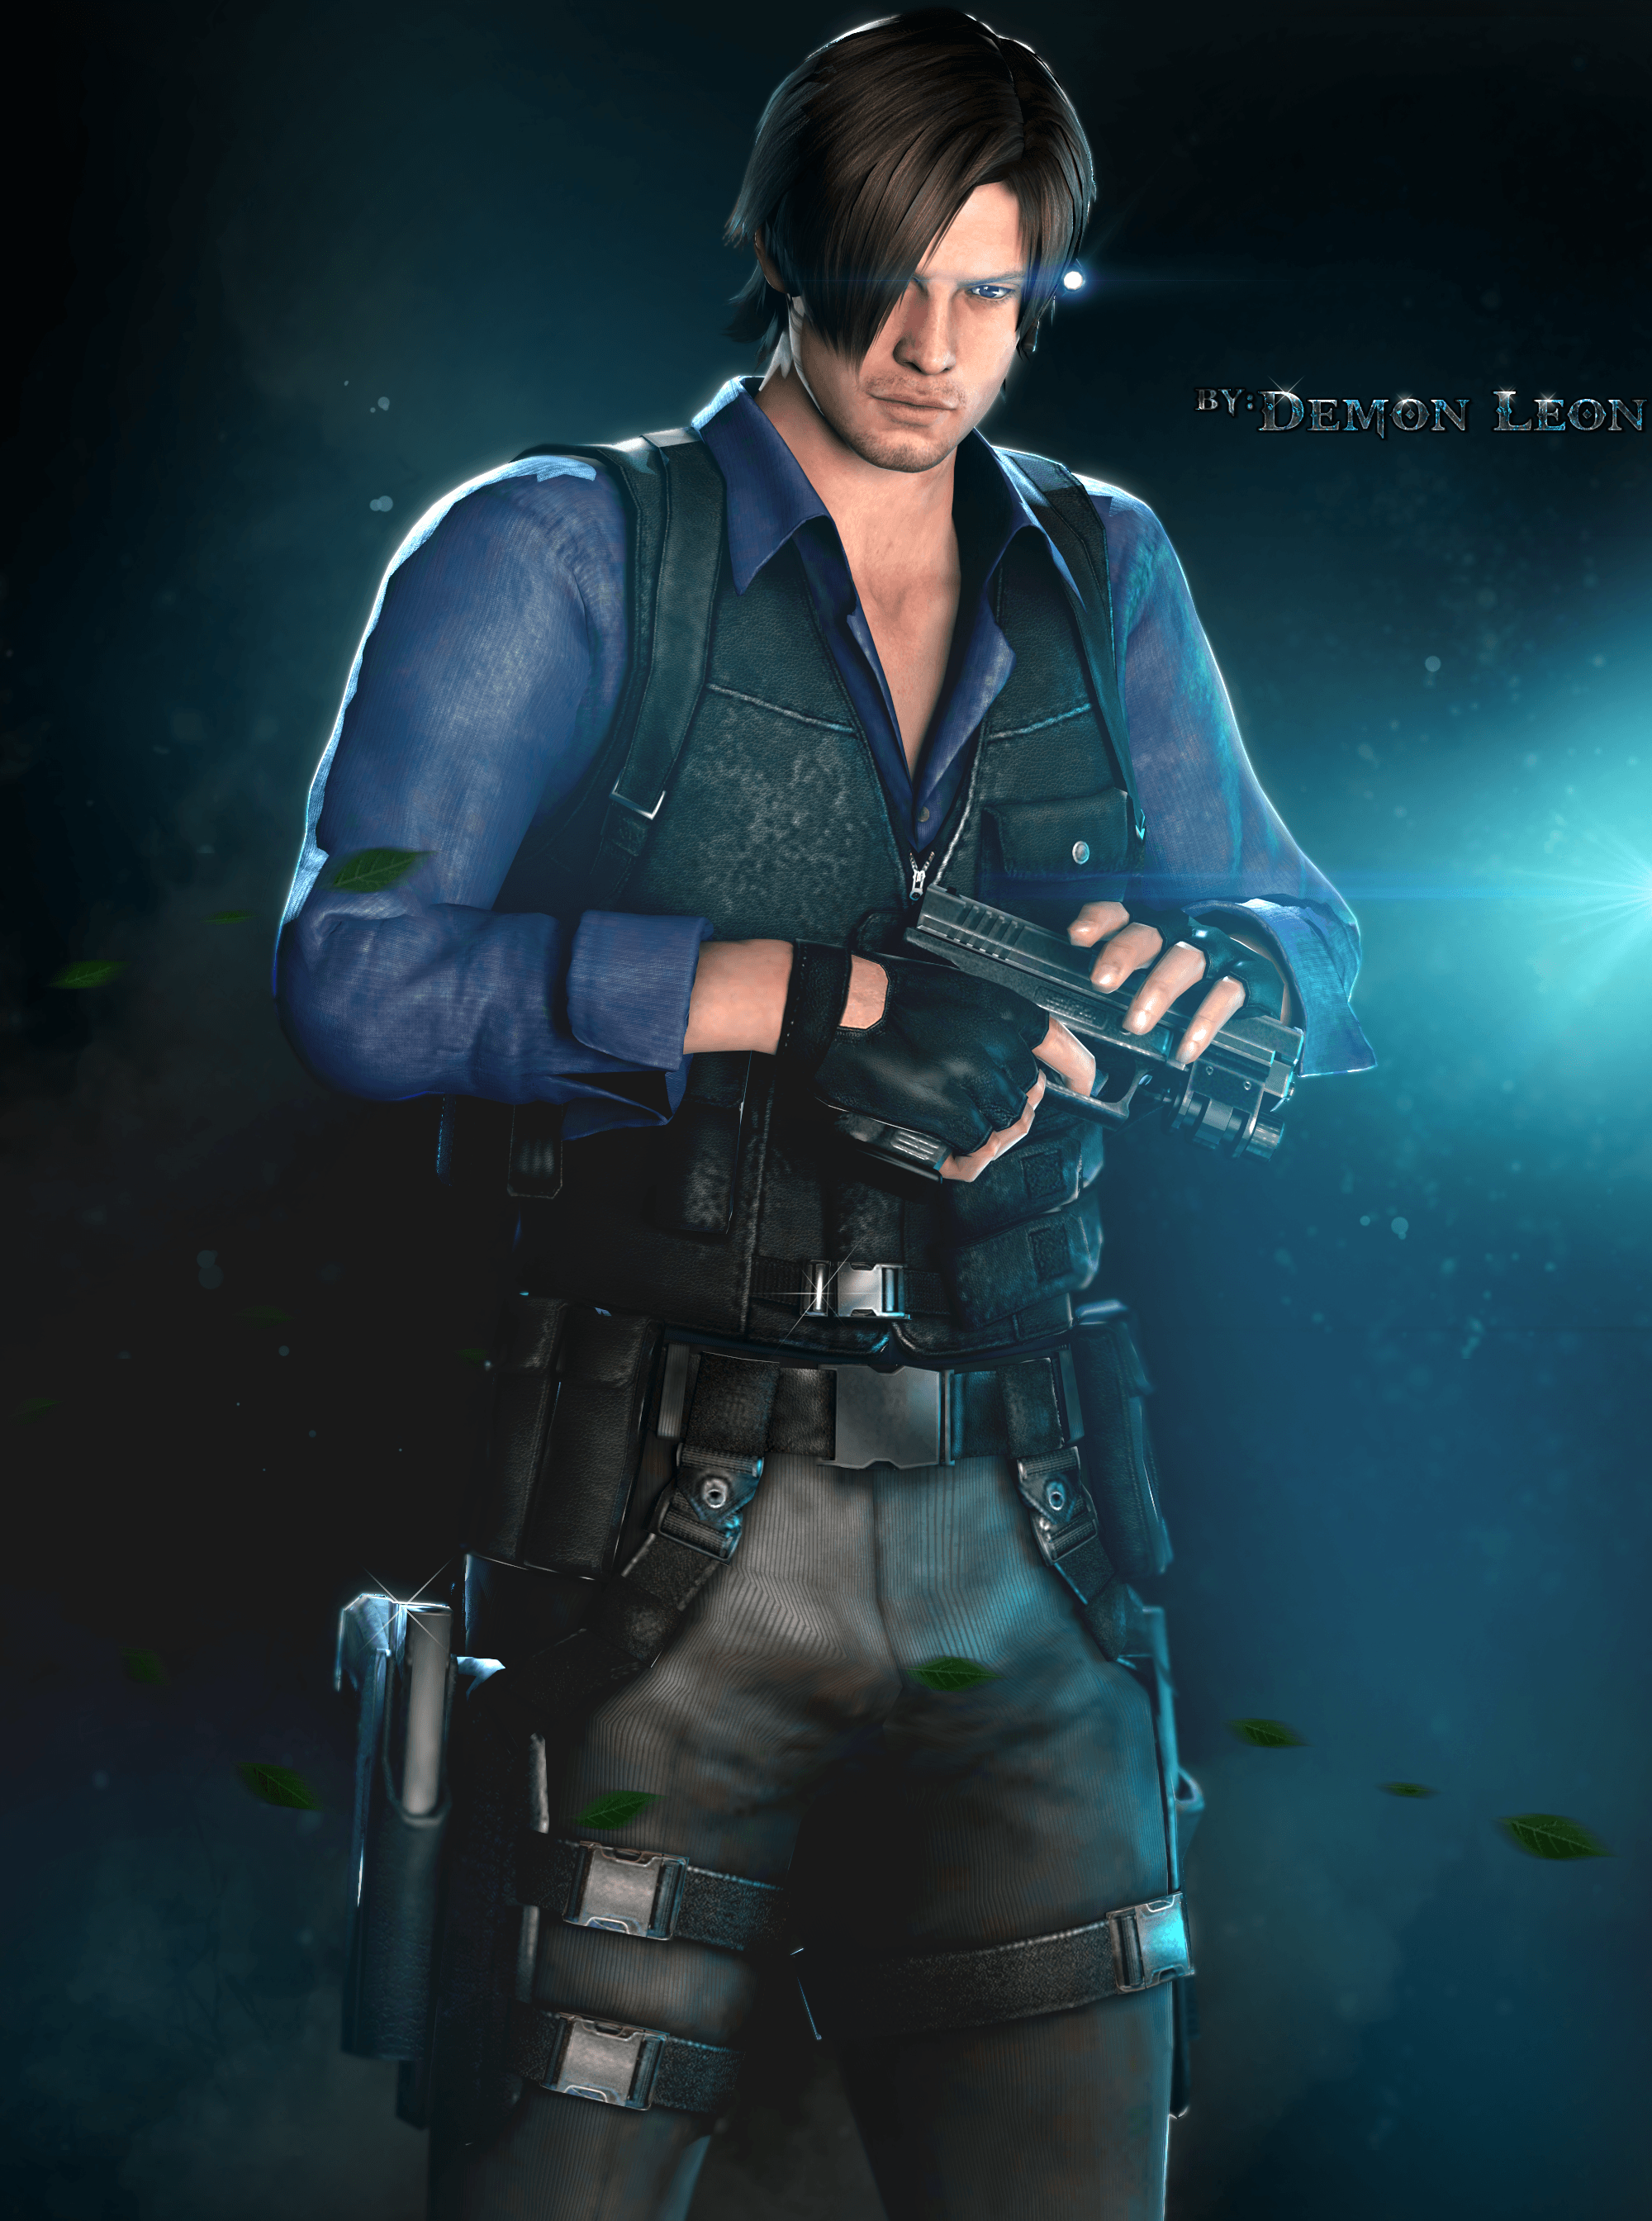 Wallpaper ID 346813  Video Game Resident Evil 4 Phone Wallpaper Leon S  Kennedy 1125x2436 free download